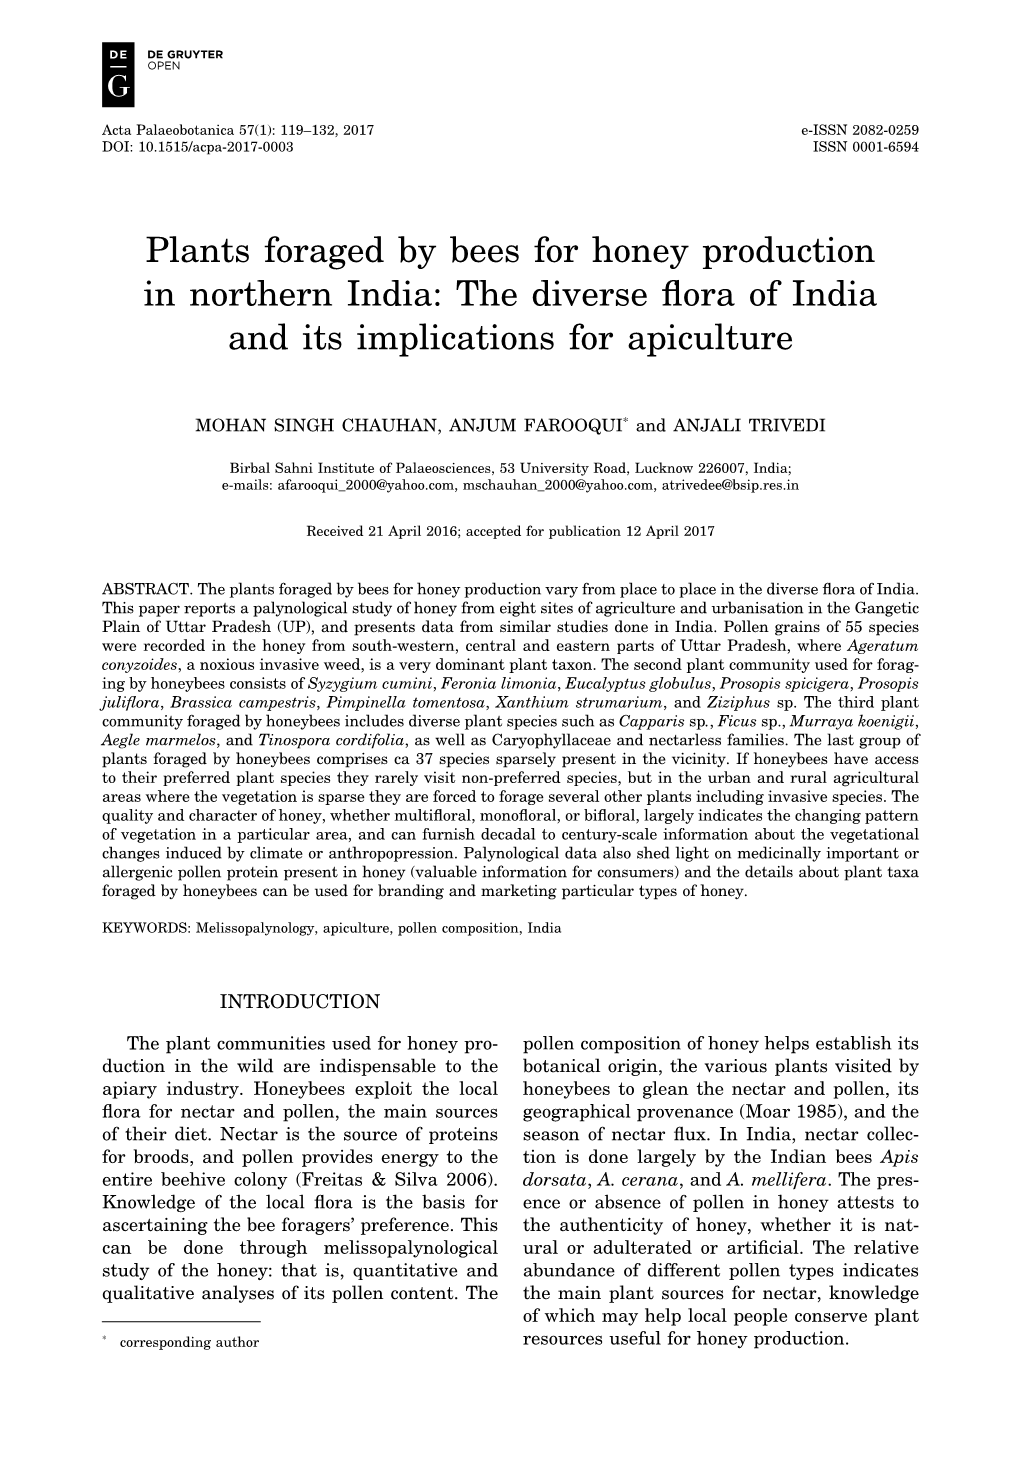 Plants Foraged by Bees for Honey Production in Northern India: the Diverse Flora of India and Its Implications for Apiculture